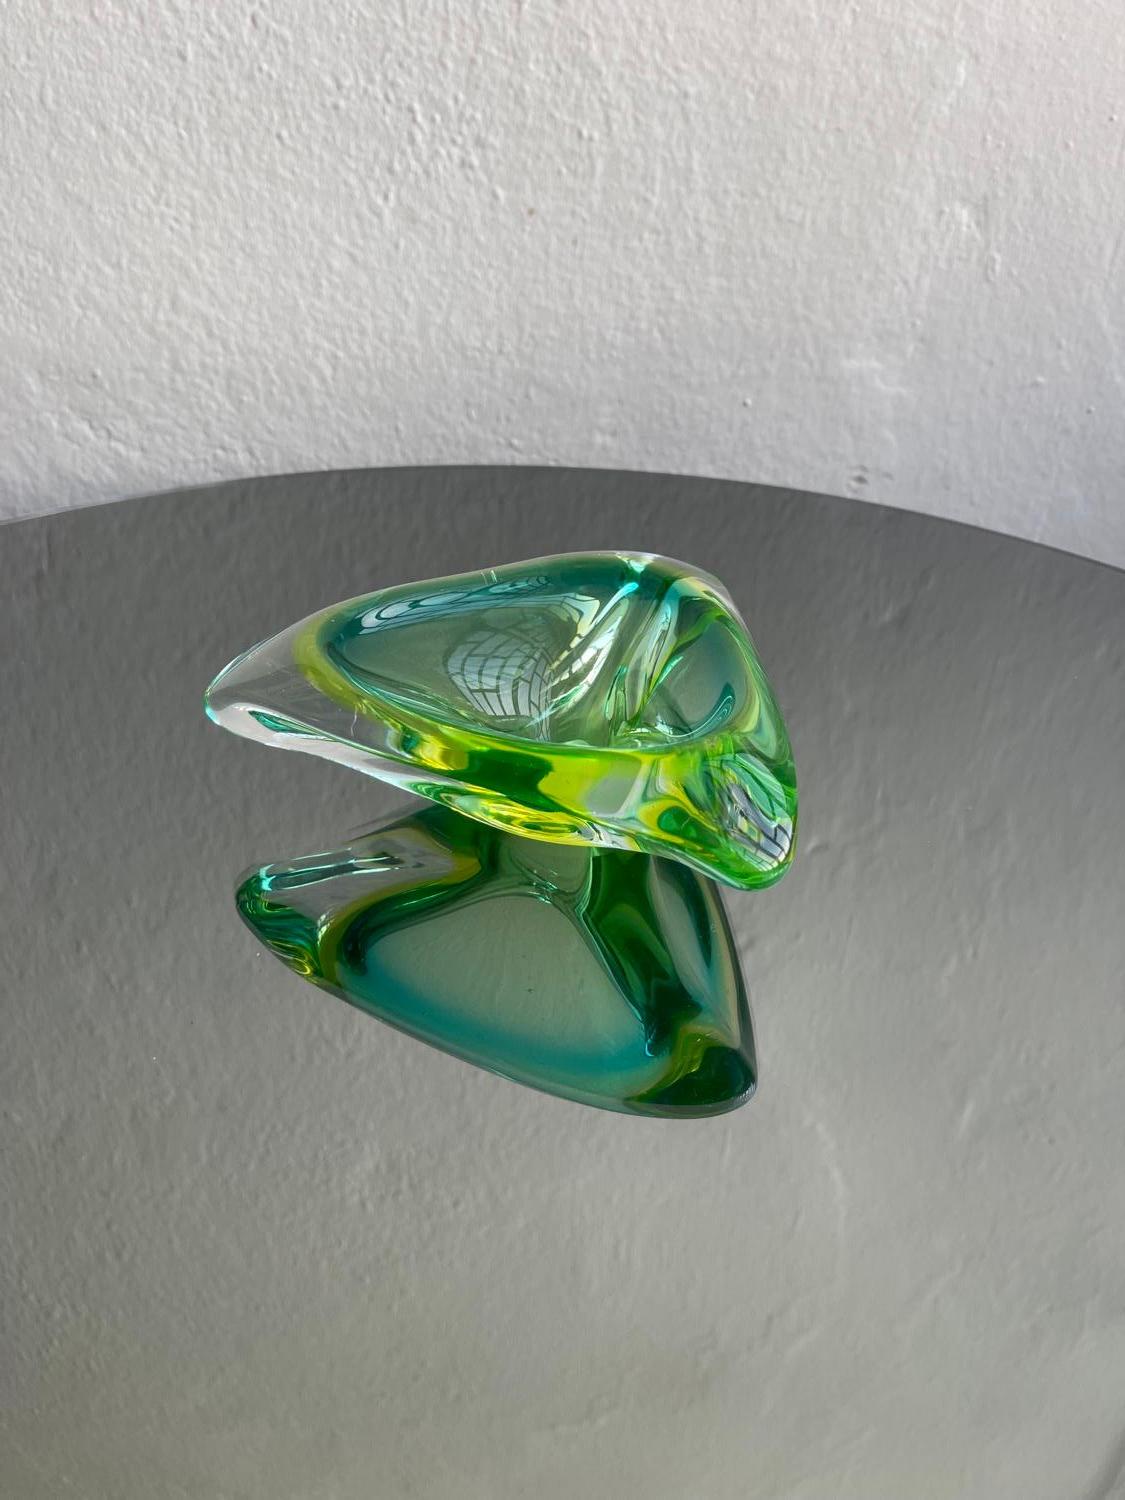 Acid green decorative bowl - Murano glass valet tray - collectible bright Murano glass

A heavy, fun and highly decorative Murano bowl / valet tray, in acid green with a subtle light blue accent visible under certain light conditions. It's perfect